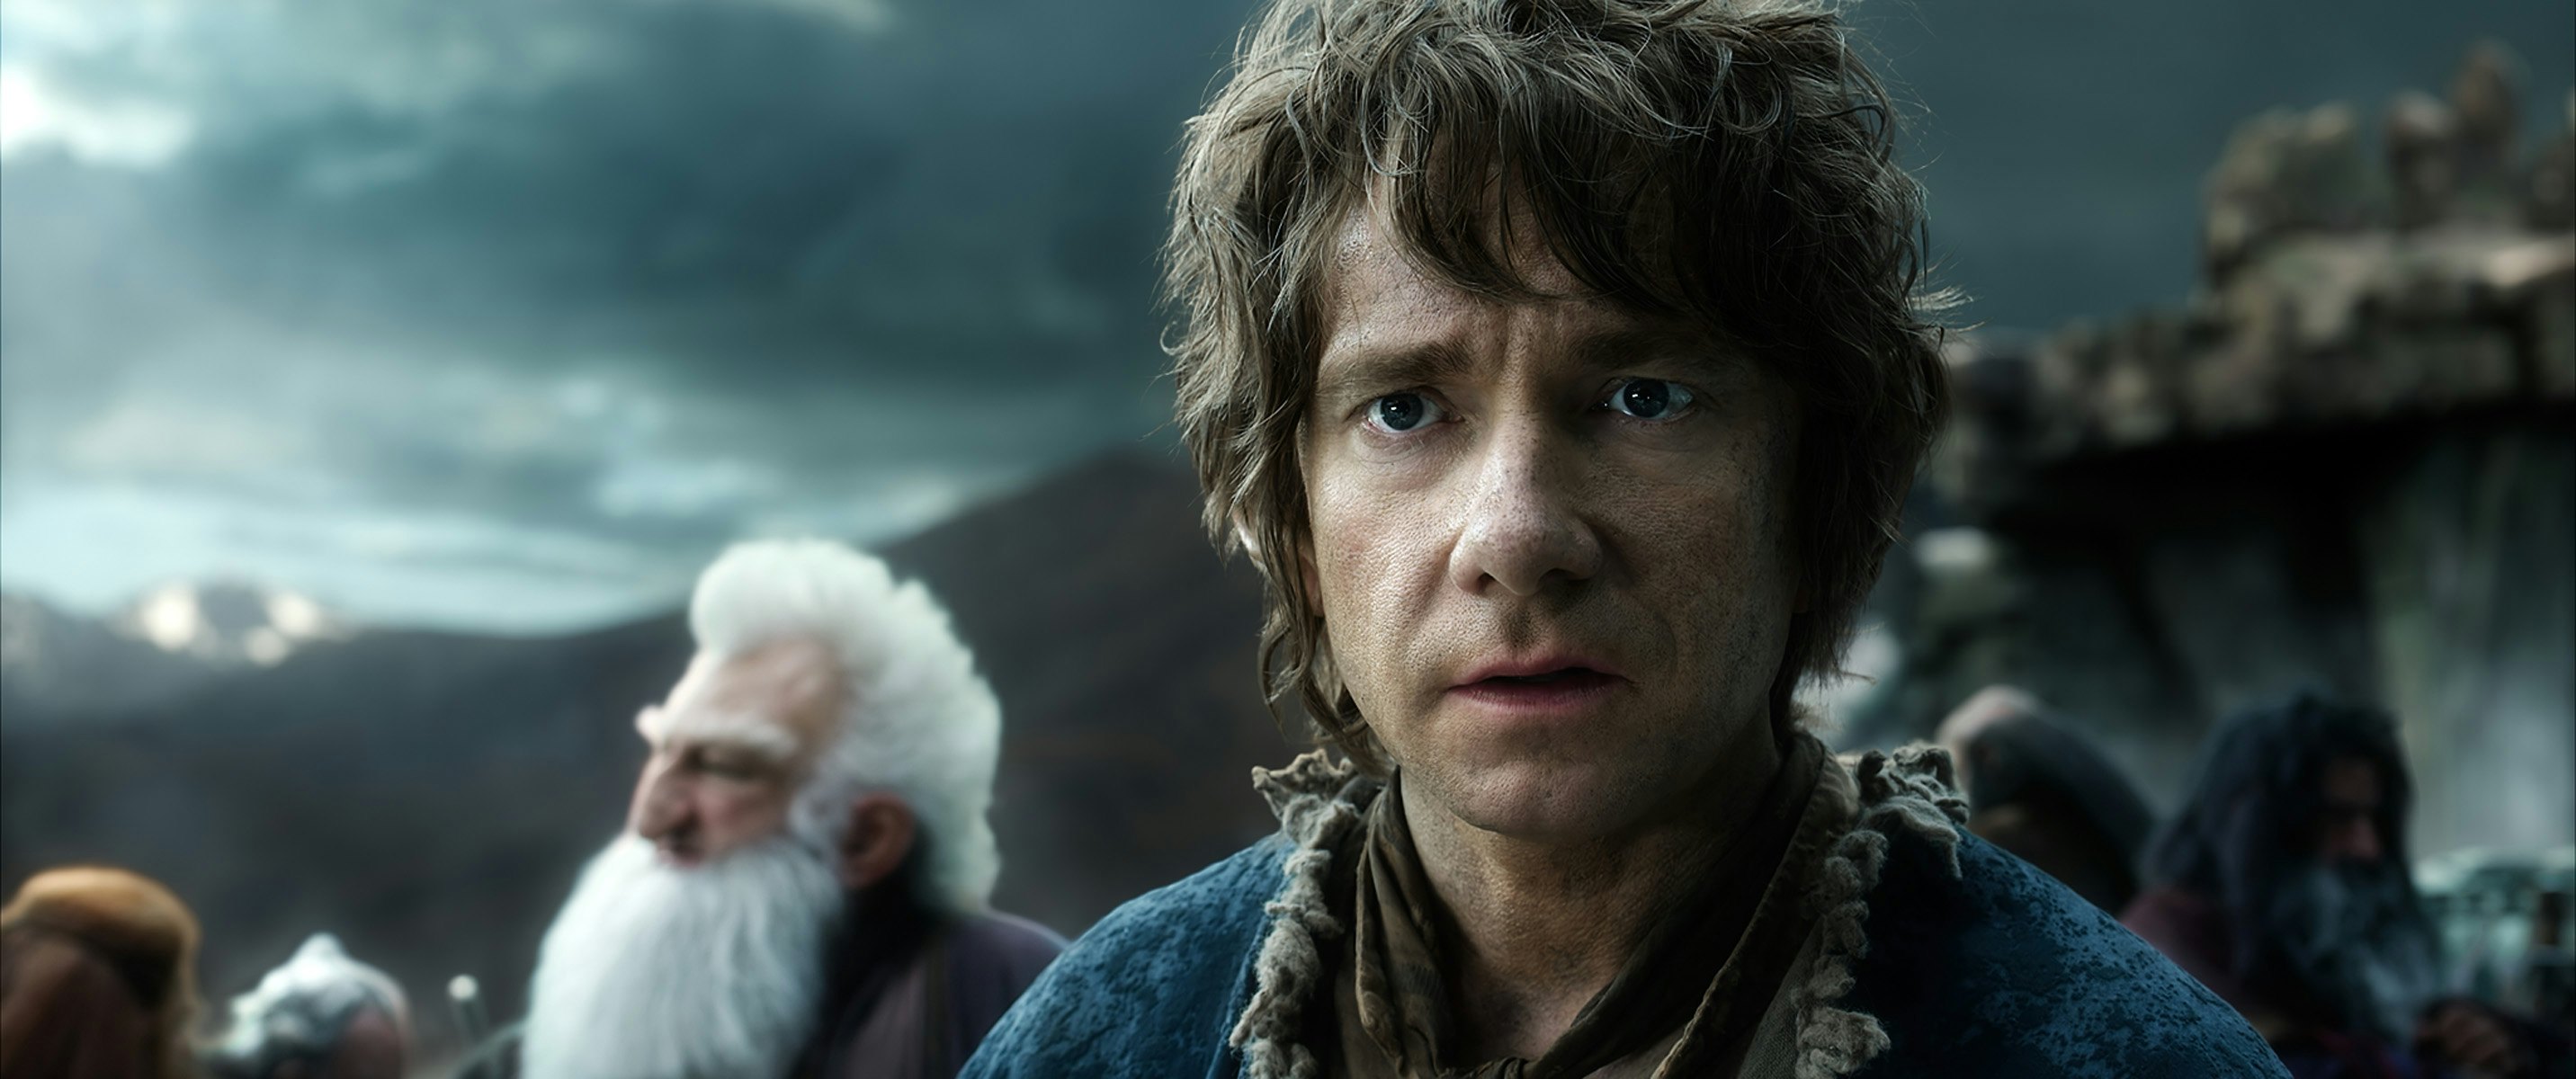 Darkness Is Coming In The New Lord Of The Rings: The Rings Of Power Trailer  | TV Series | Empire